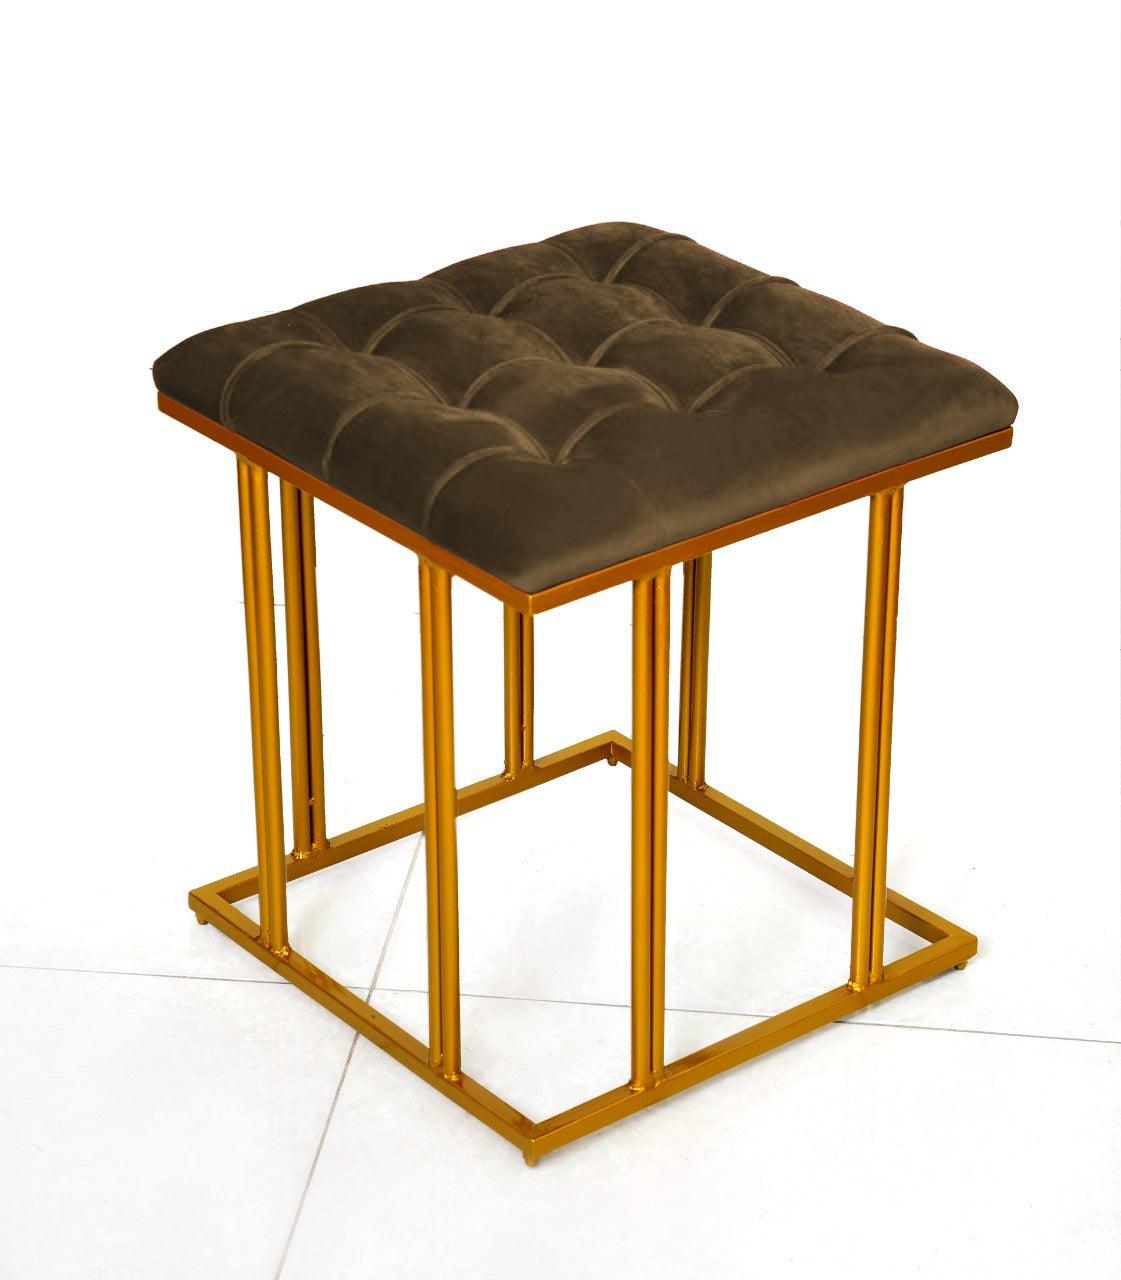 Luxury Velvet Square Stool With Steel Stand -909 - 92Bedding